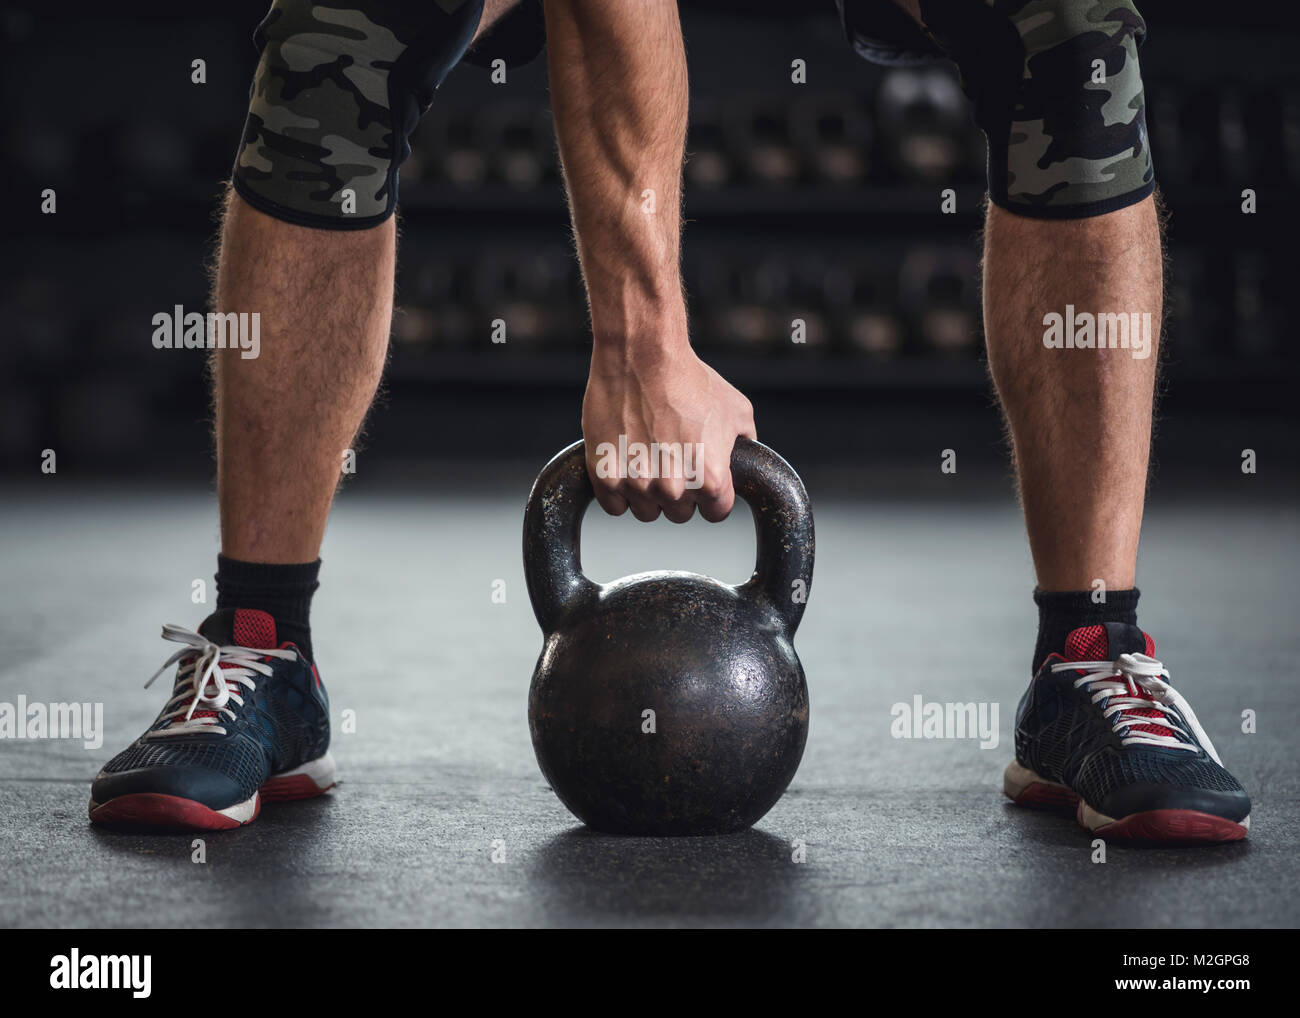 Weightlifting, powerlifting, crossfit, strength training. Stock Photo